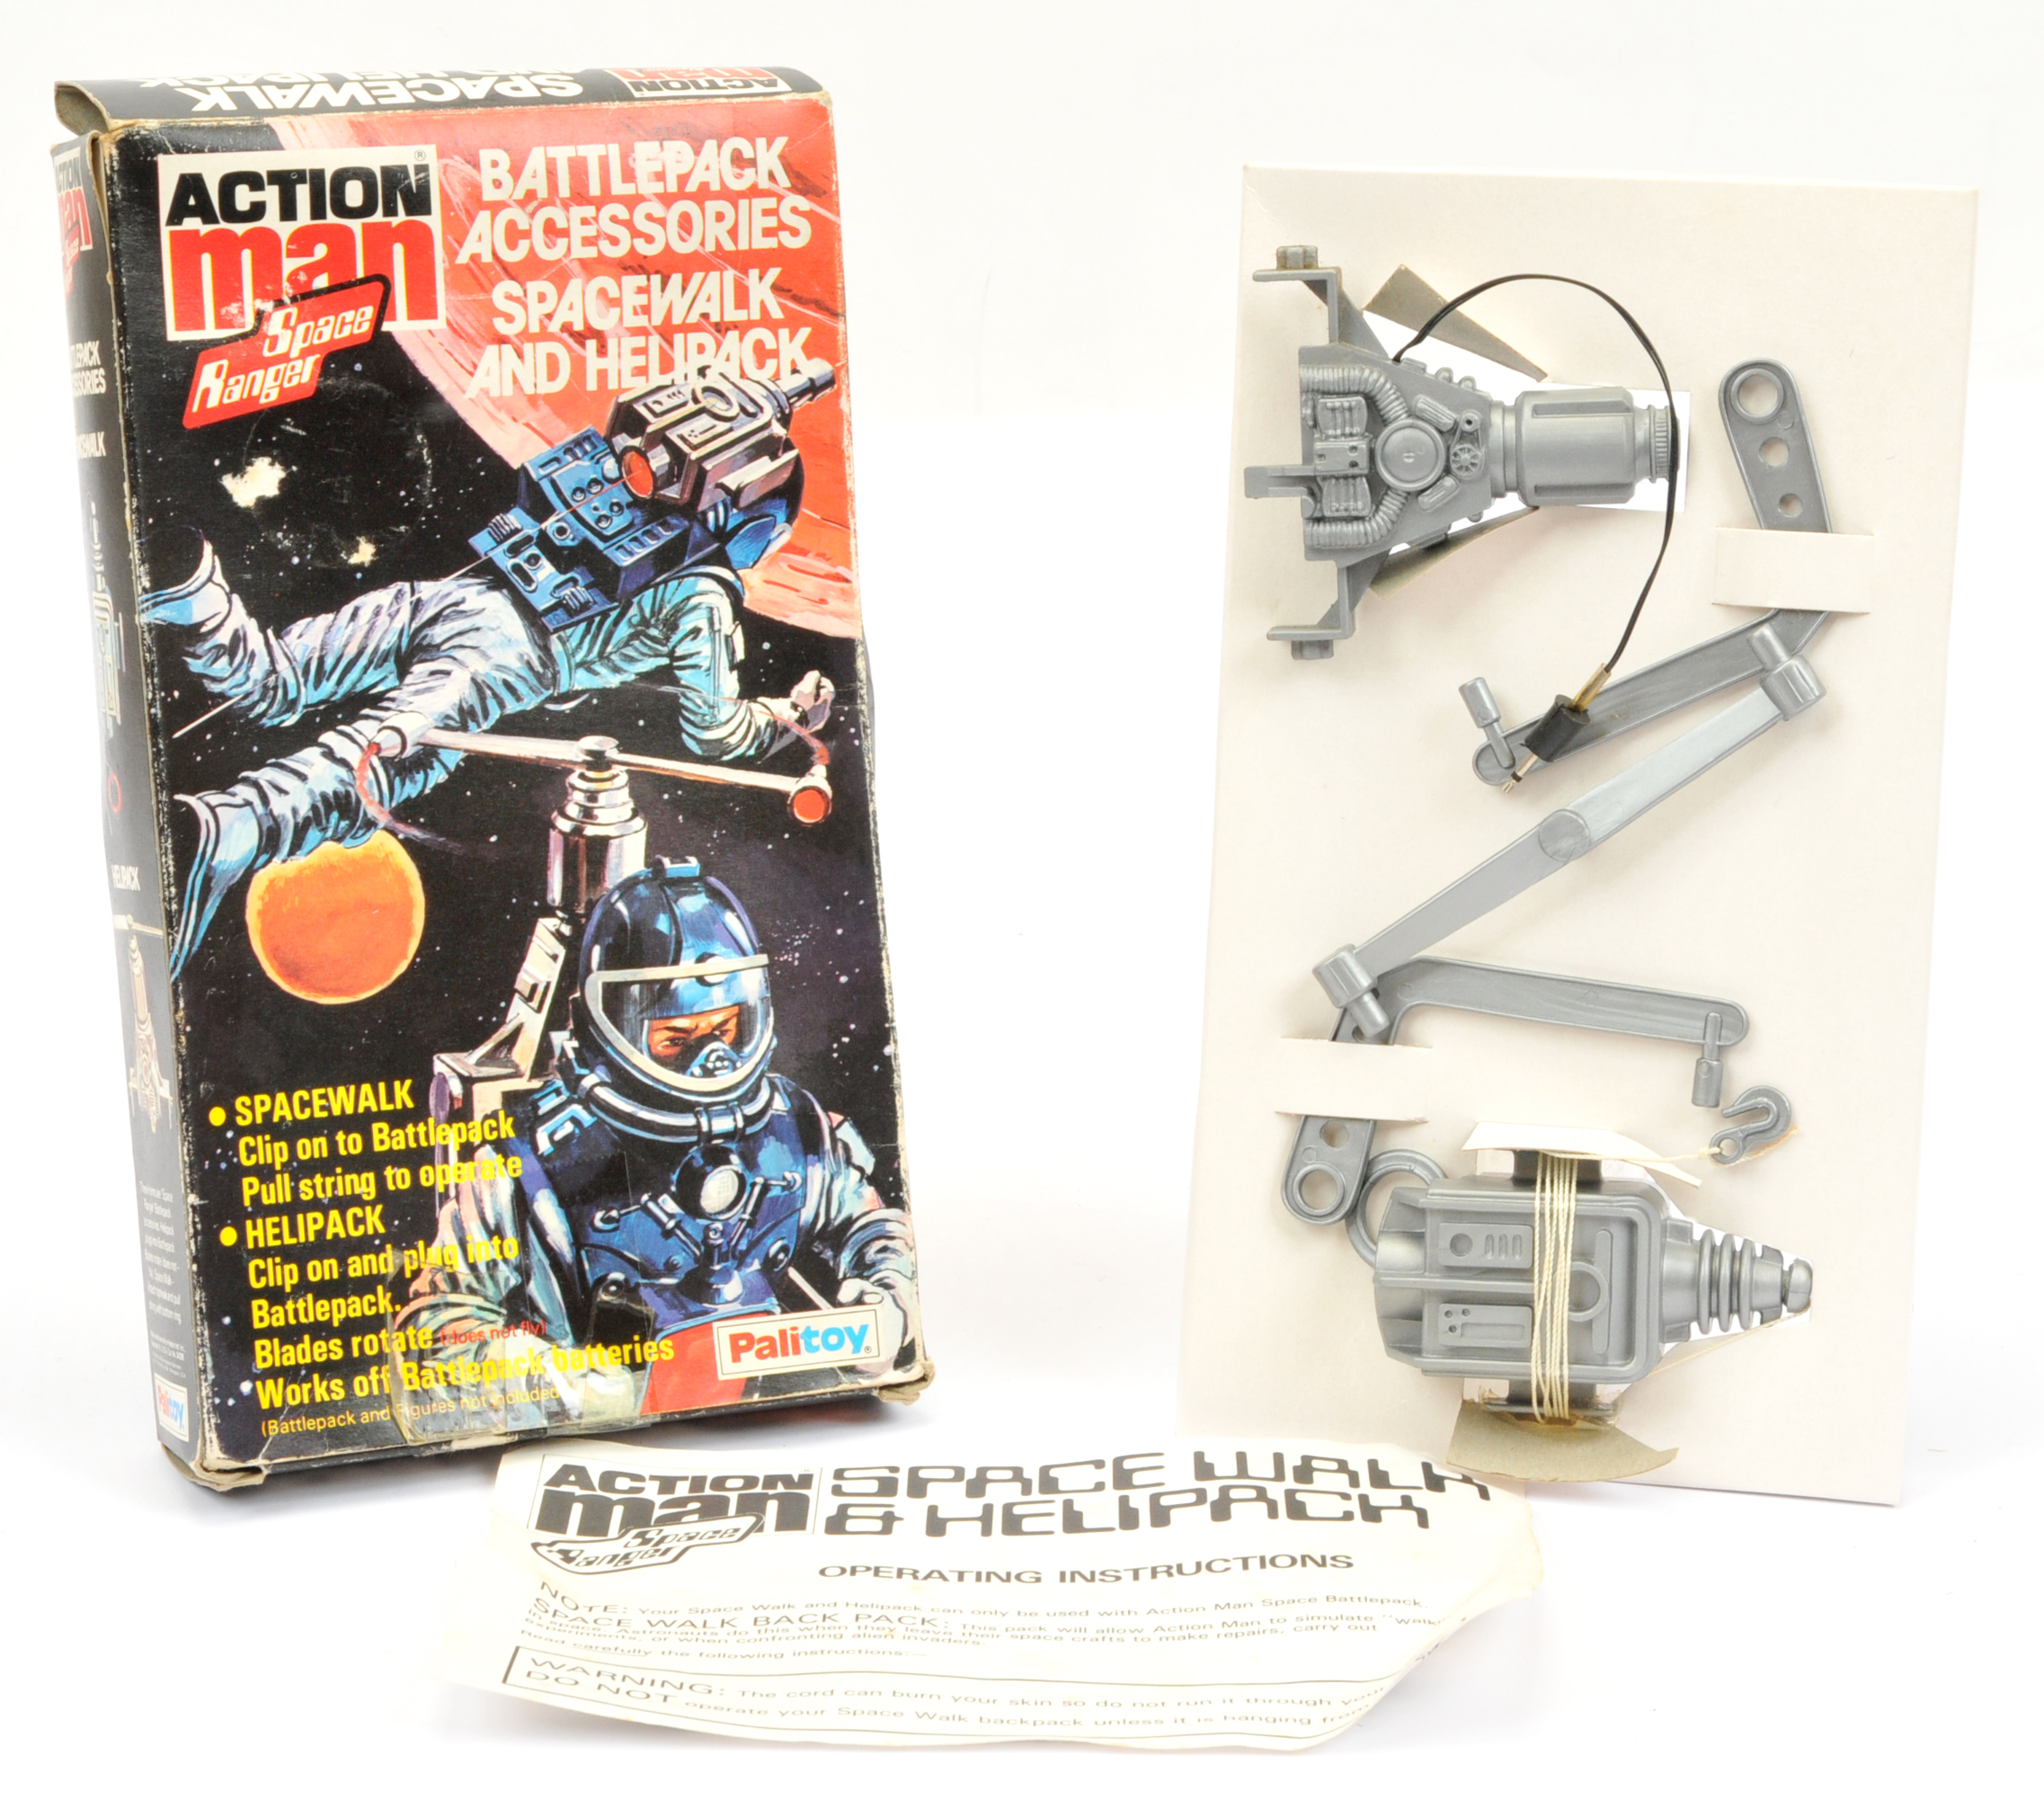 Palitoy Action Man vintage Battlepack Accessories Spacewalk and Helipack, within Fair (crushed) box.